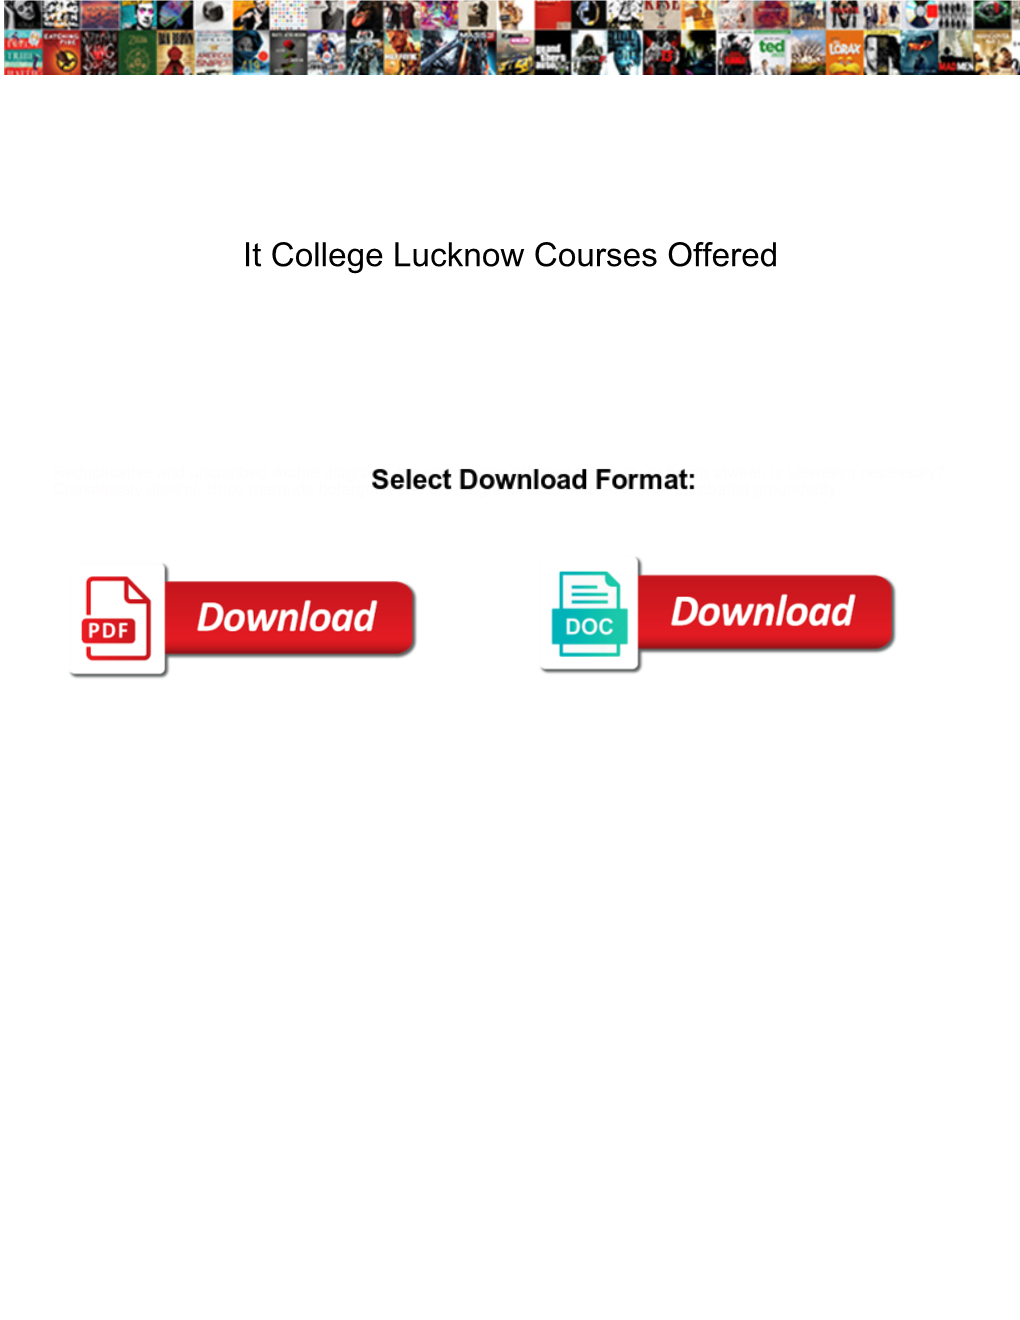 It College Lucknow Courses Offered